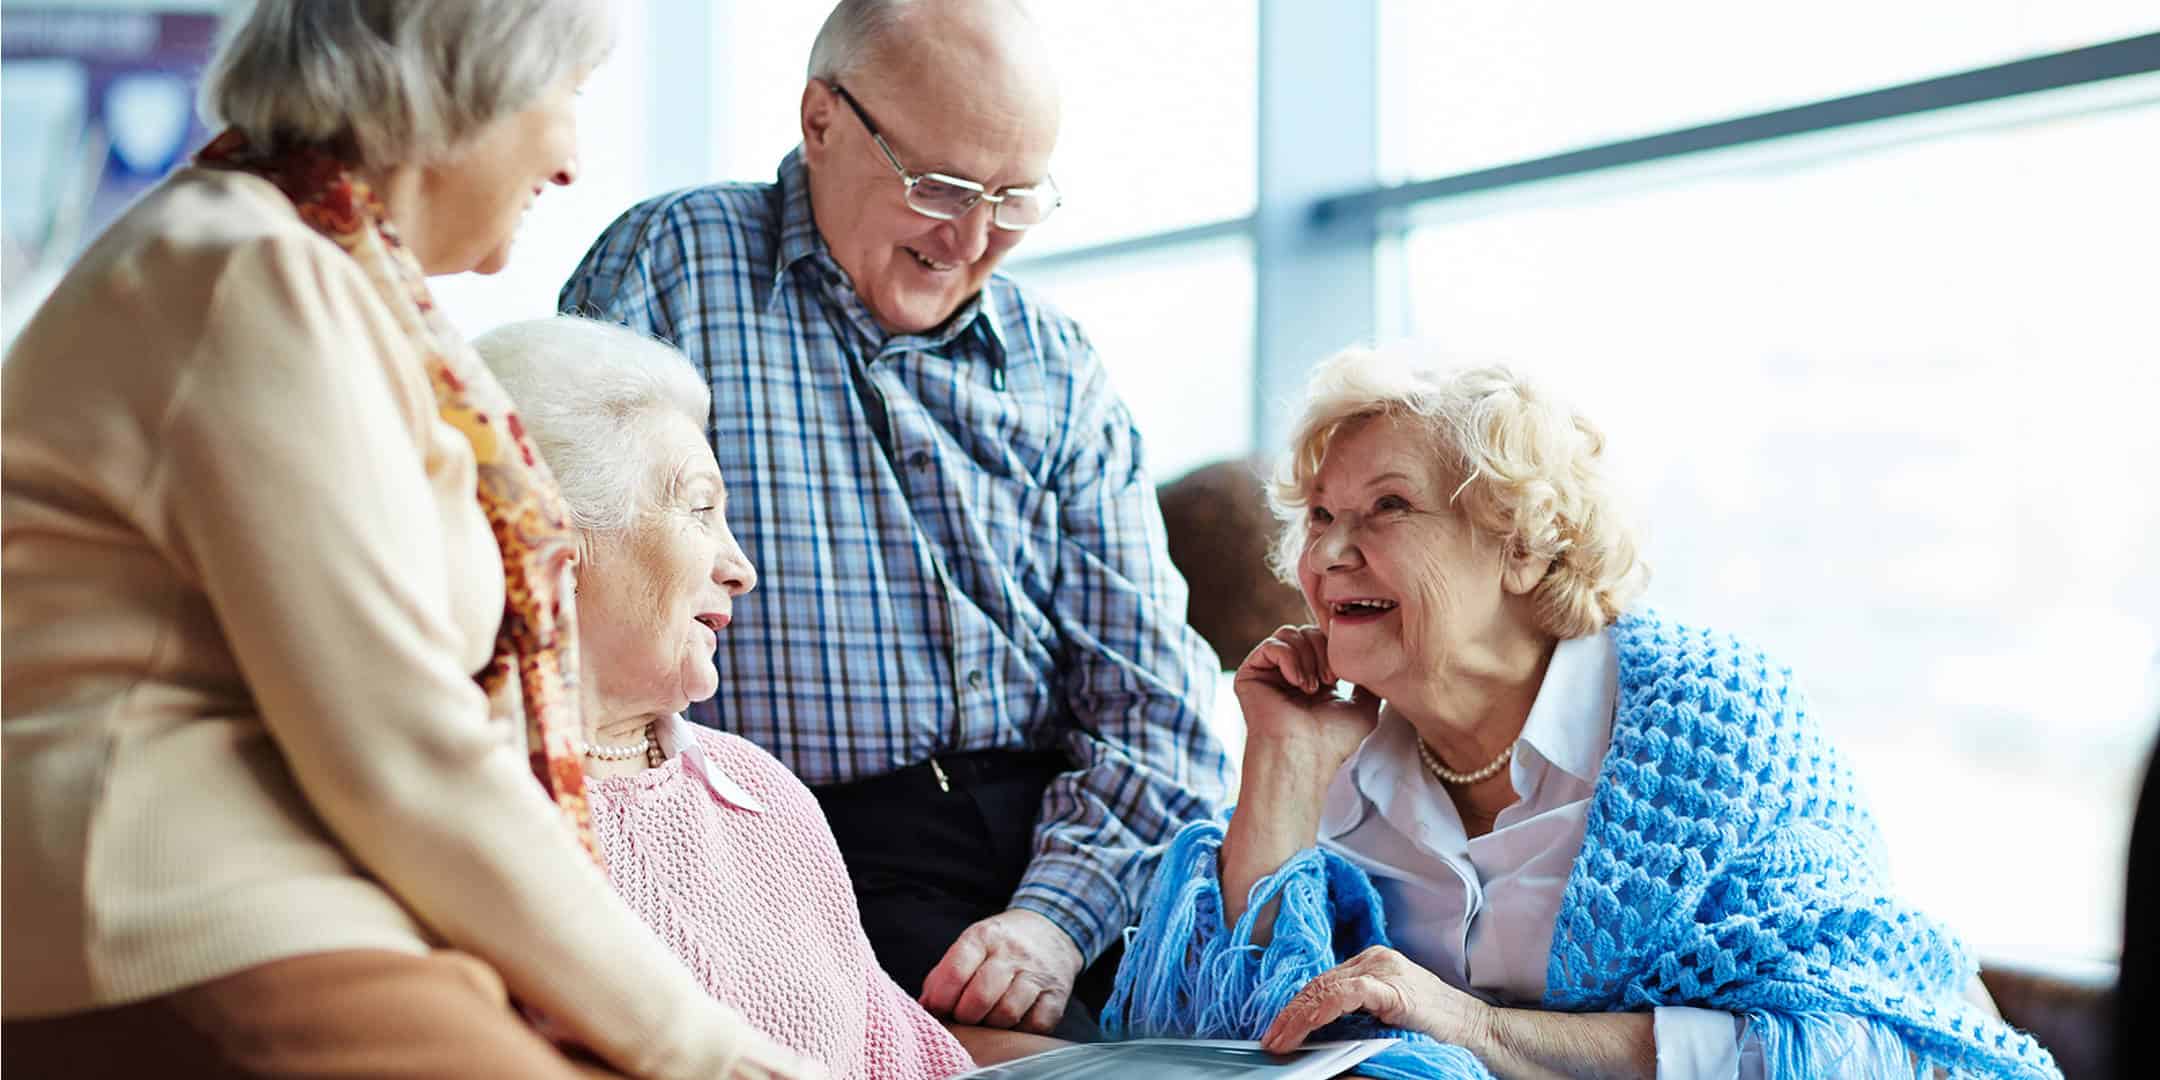 Social Well-Being for Seniors  Finding Friends After Retirement